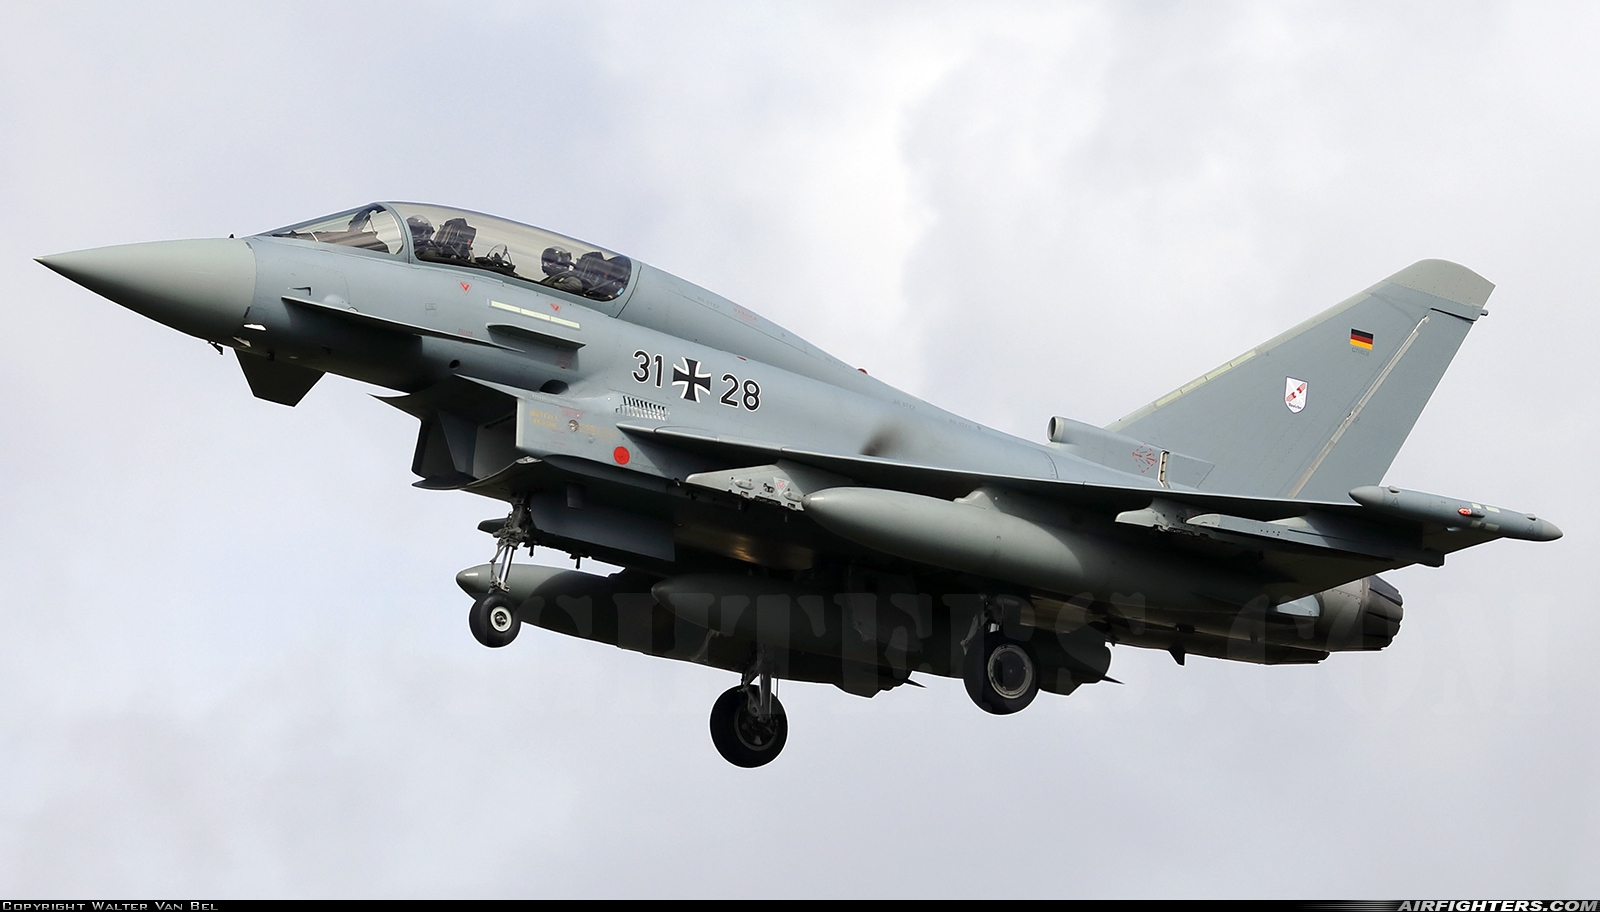 Germany - Air Force Eurofighter EF-2000 Typhoon T 31+28 at Norvenich (ETNN), Germany